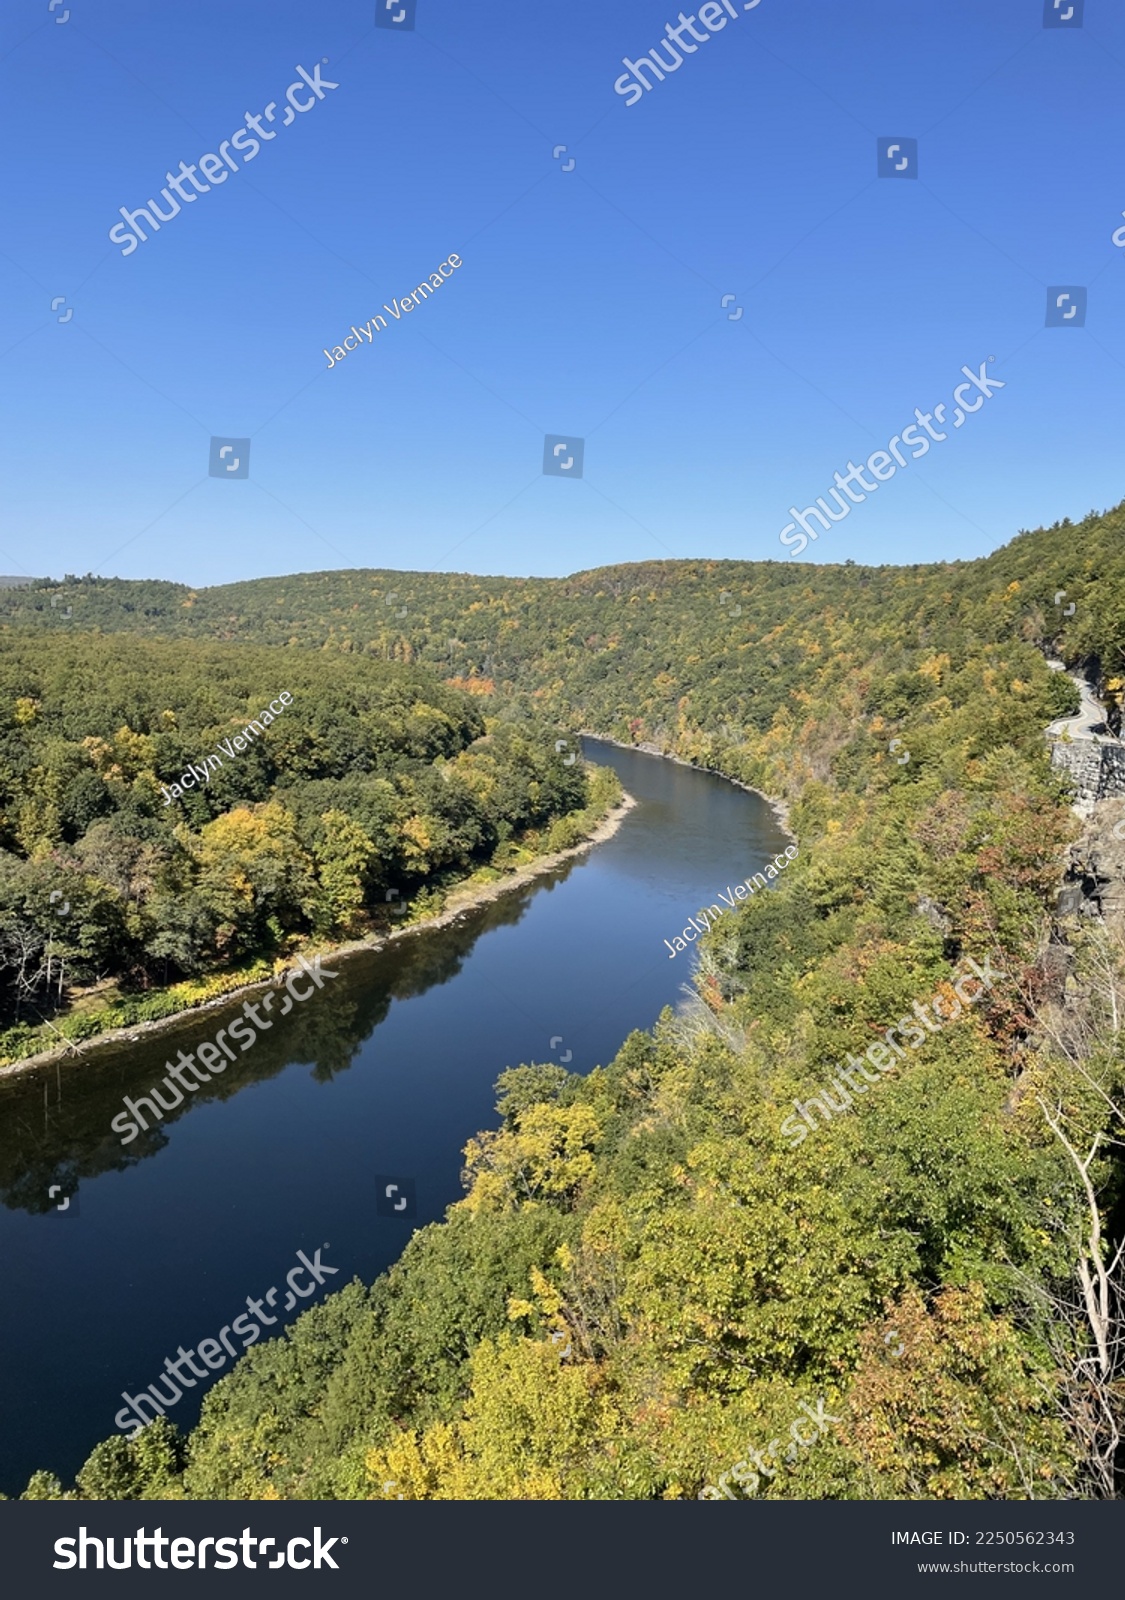 The view of the Delaware River from the beautiful Hawk's Nest overlook in New York. #2250562343